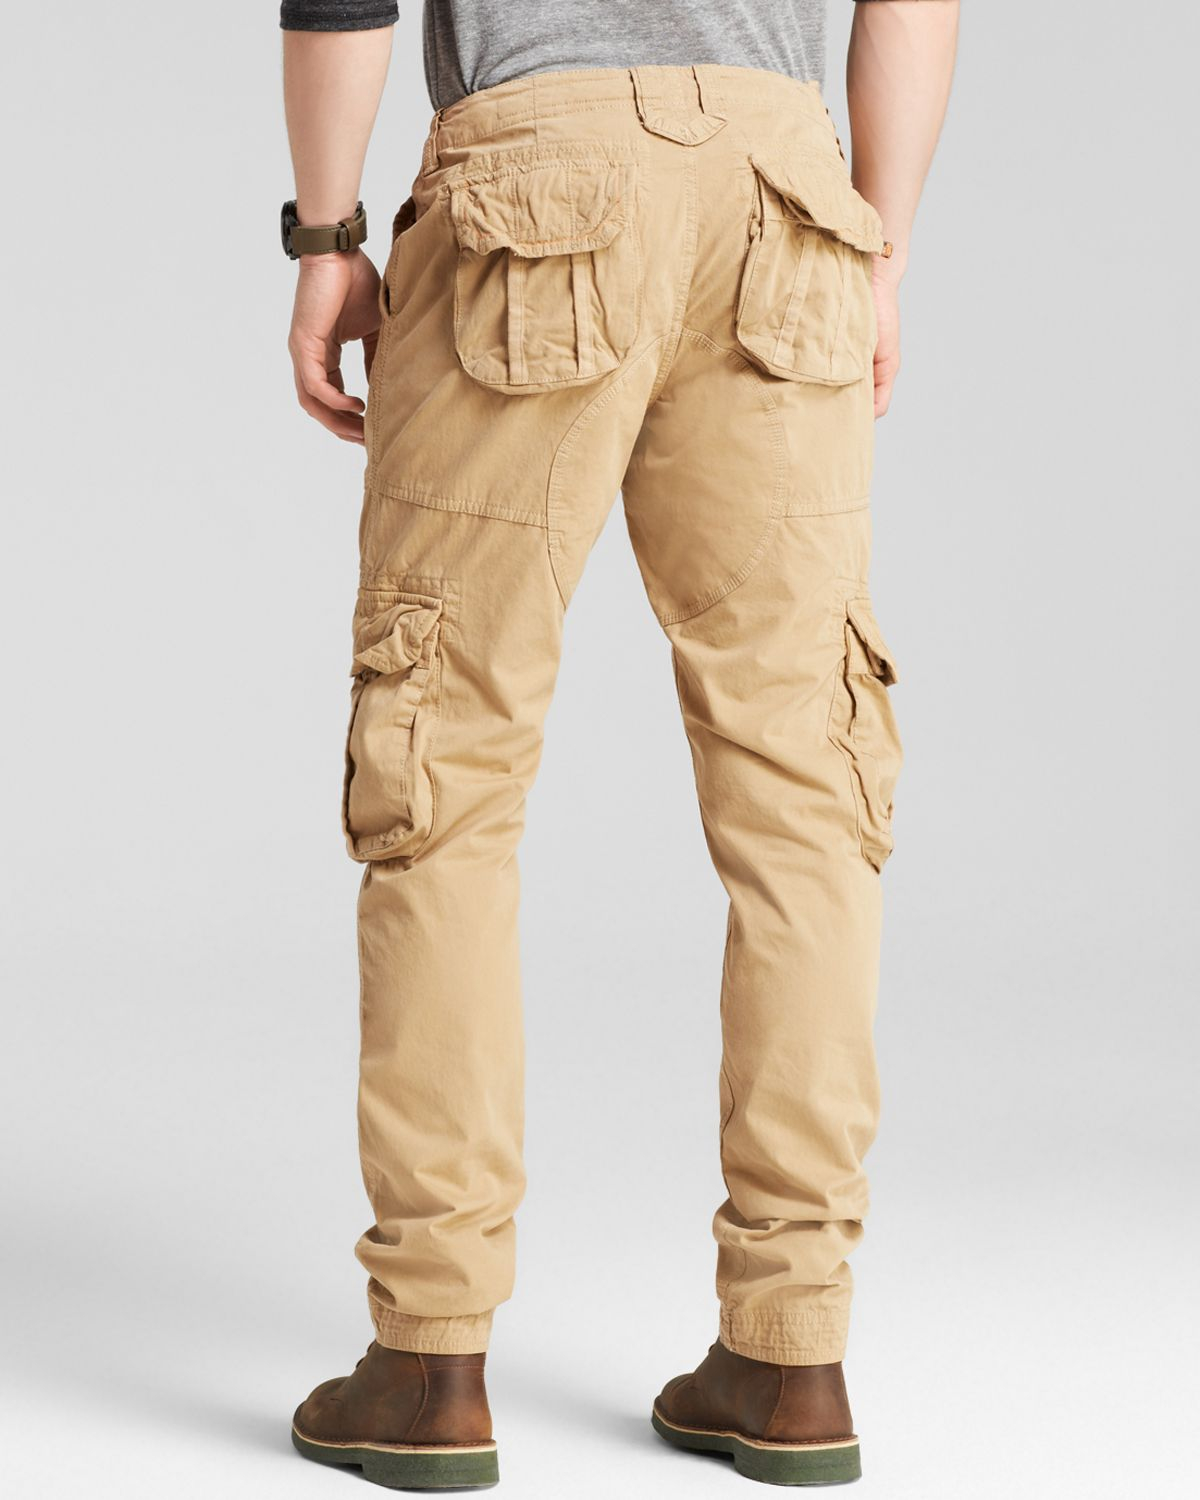 Lyst - Superdry Slim Core Cargo Lite Pants in Natural for Men